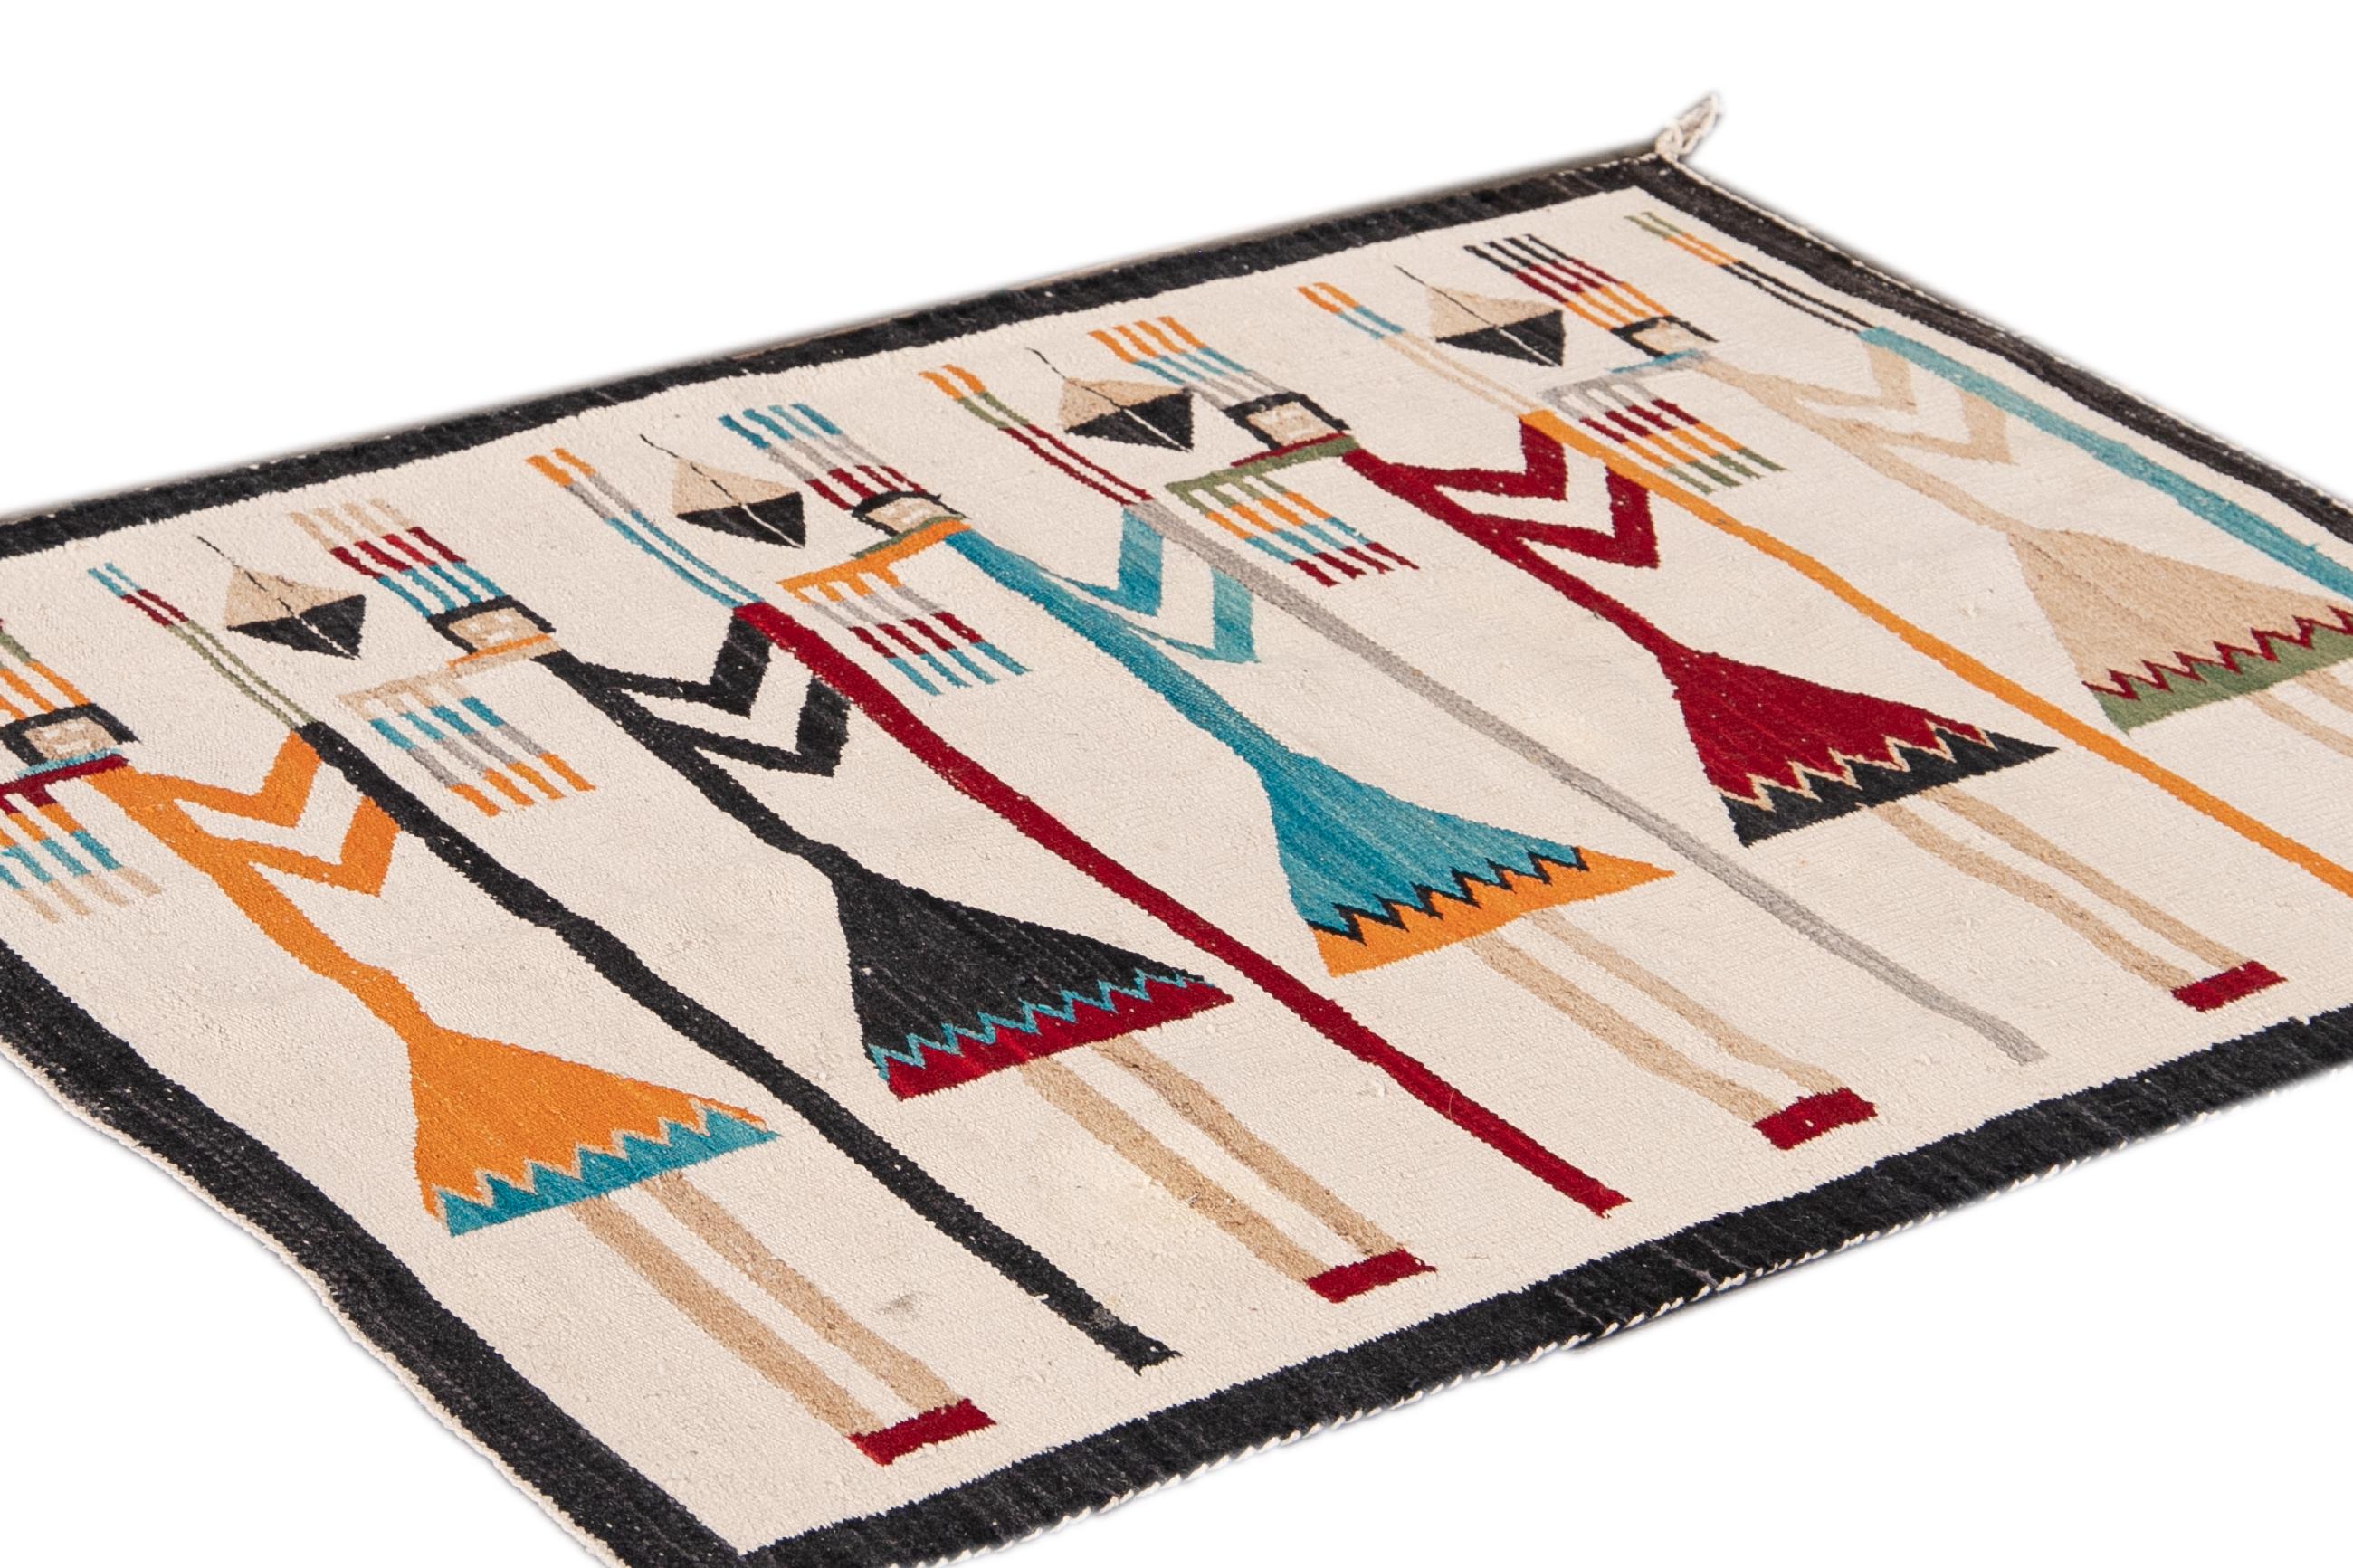 Beautiful Vintage Native American Yei Pictorial Blanket handmade wool rug with an Ivory field. This Pictorial rug has a black frame and multi-color accents in a gorgeous all-over geometric cultural design.

This rug measures 3'1